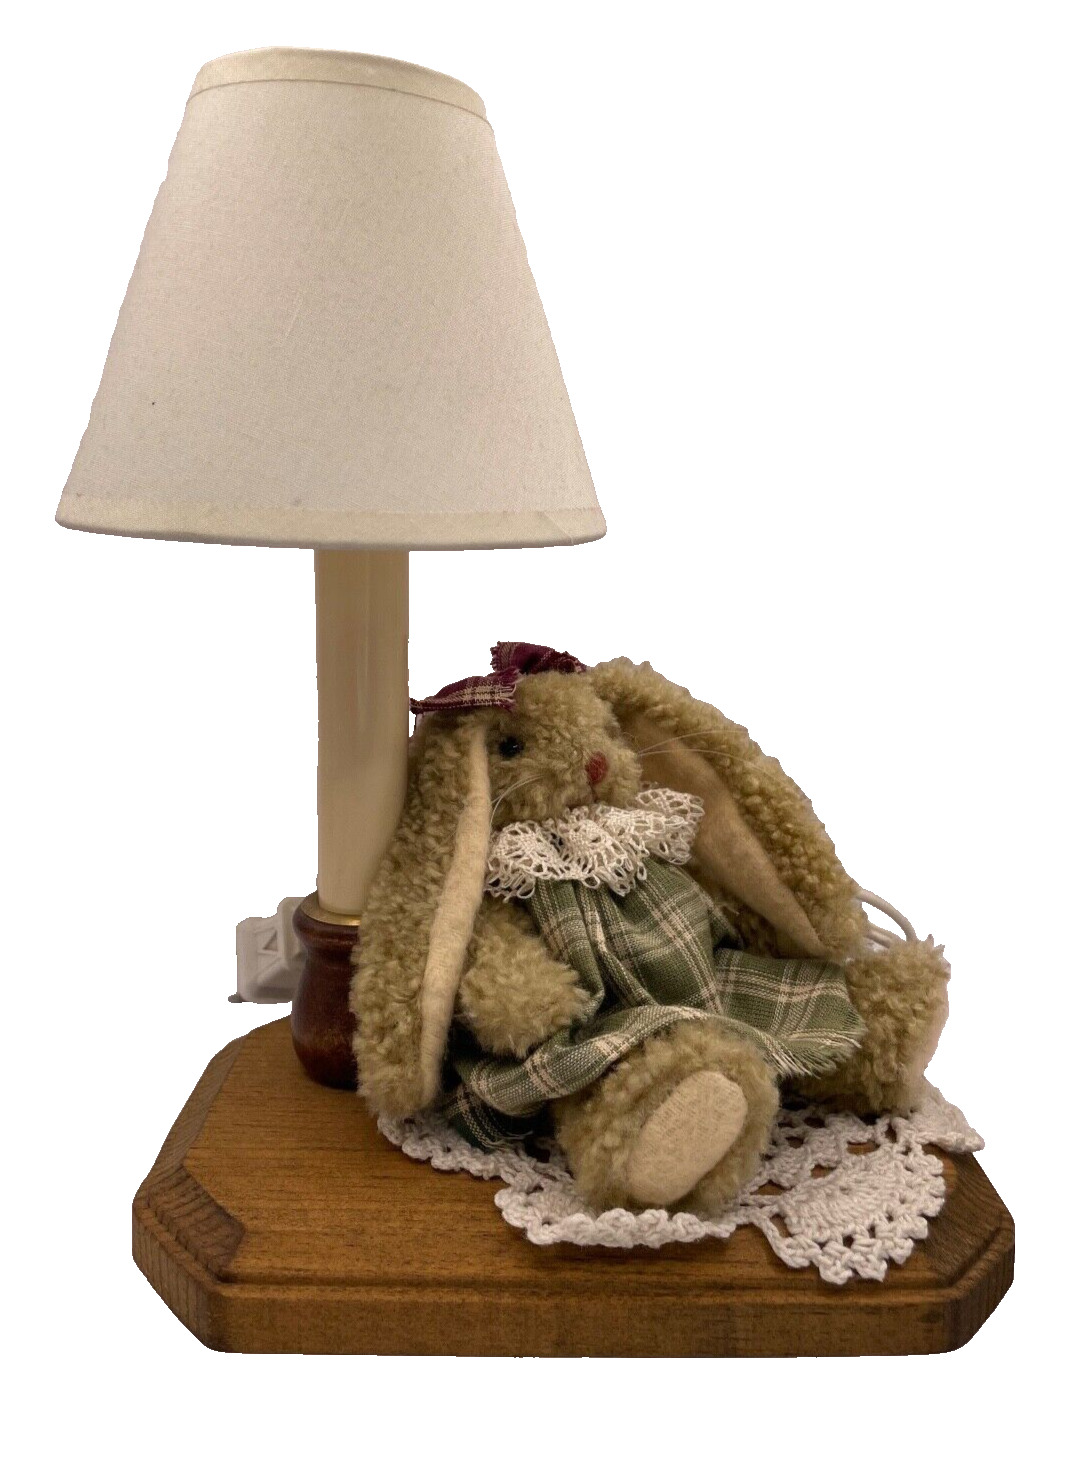 Vintage Adorable Bunny Accent Lamp- Preowned